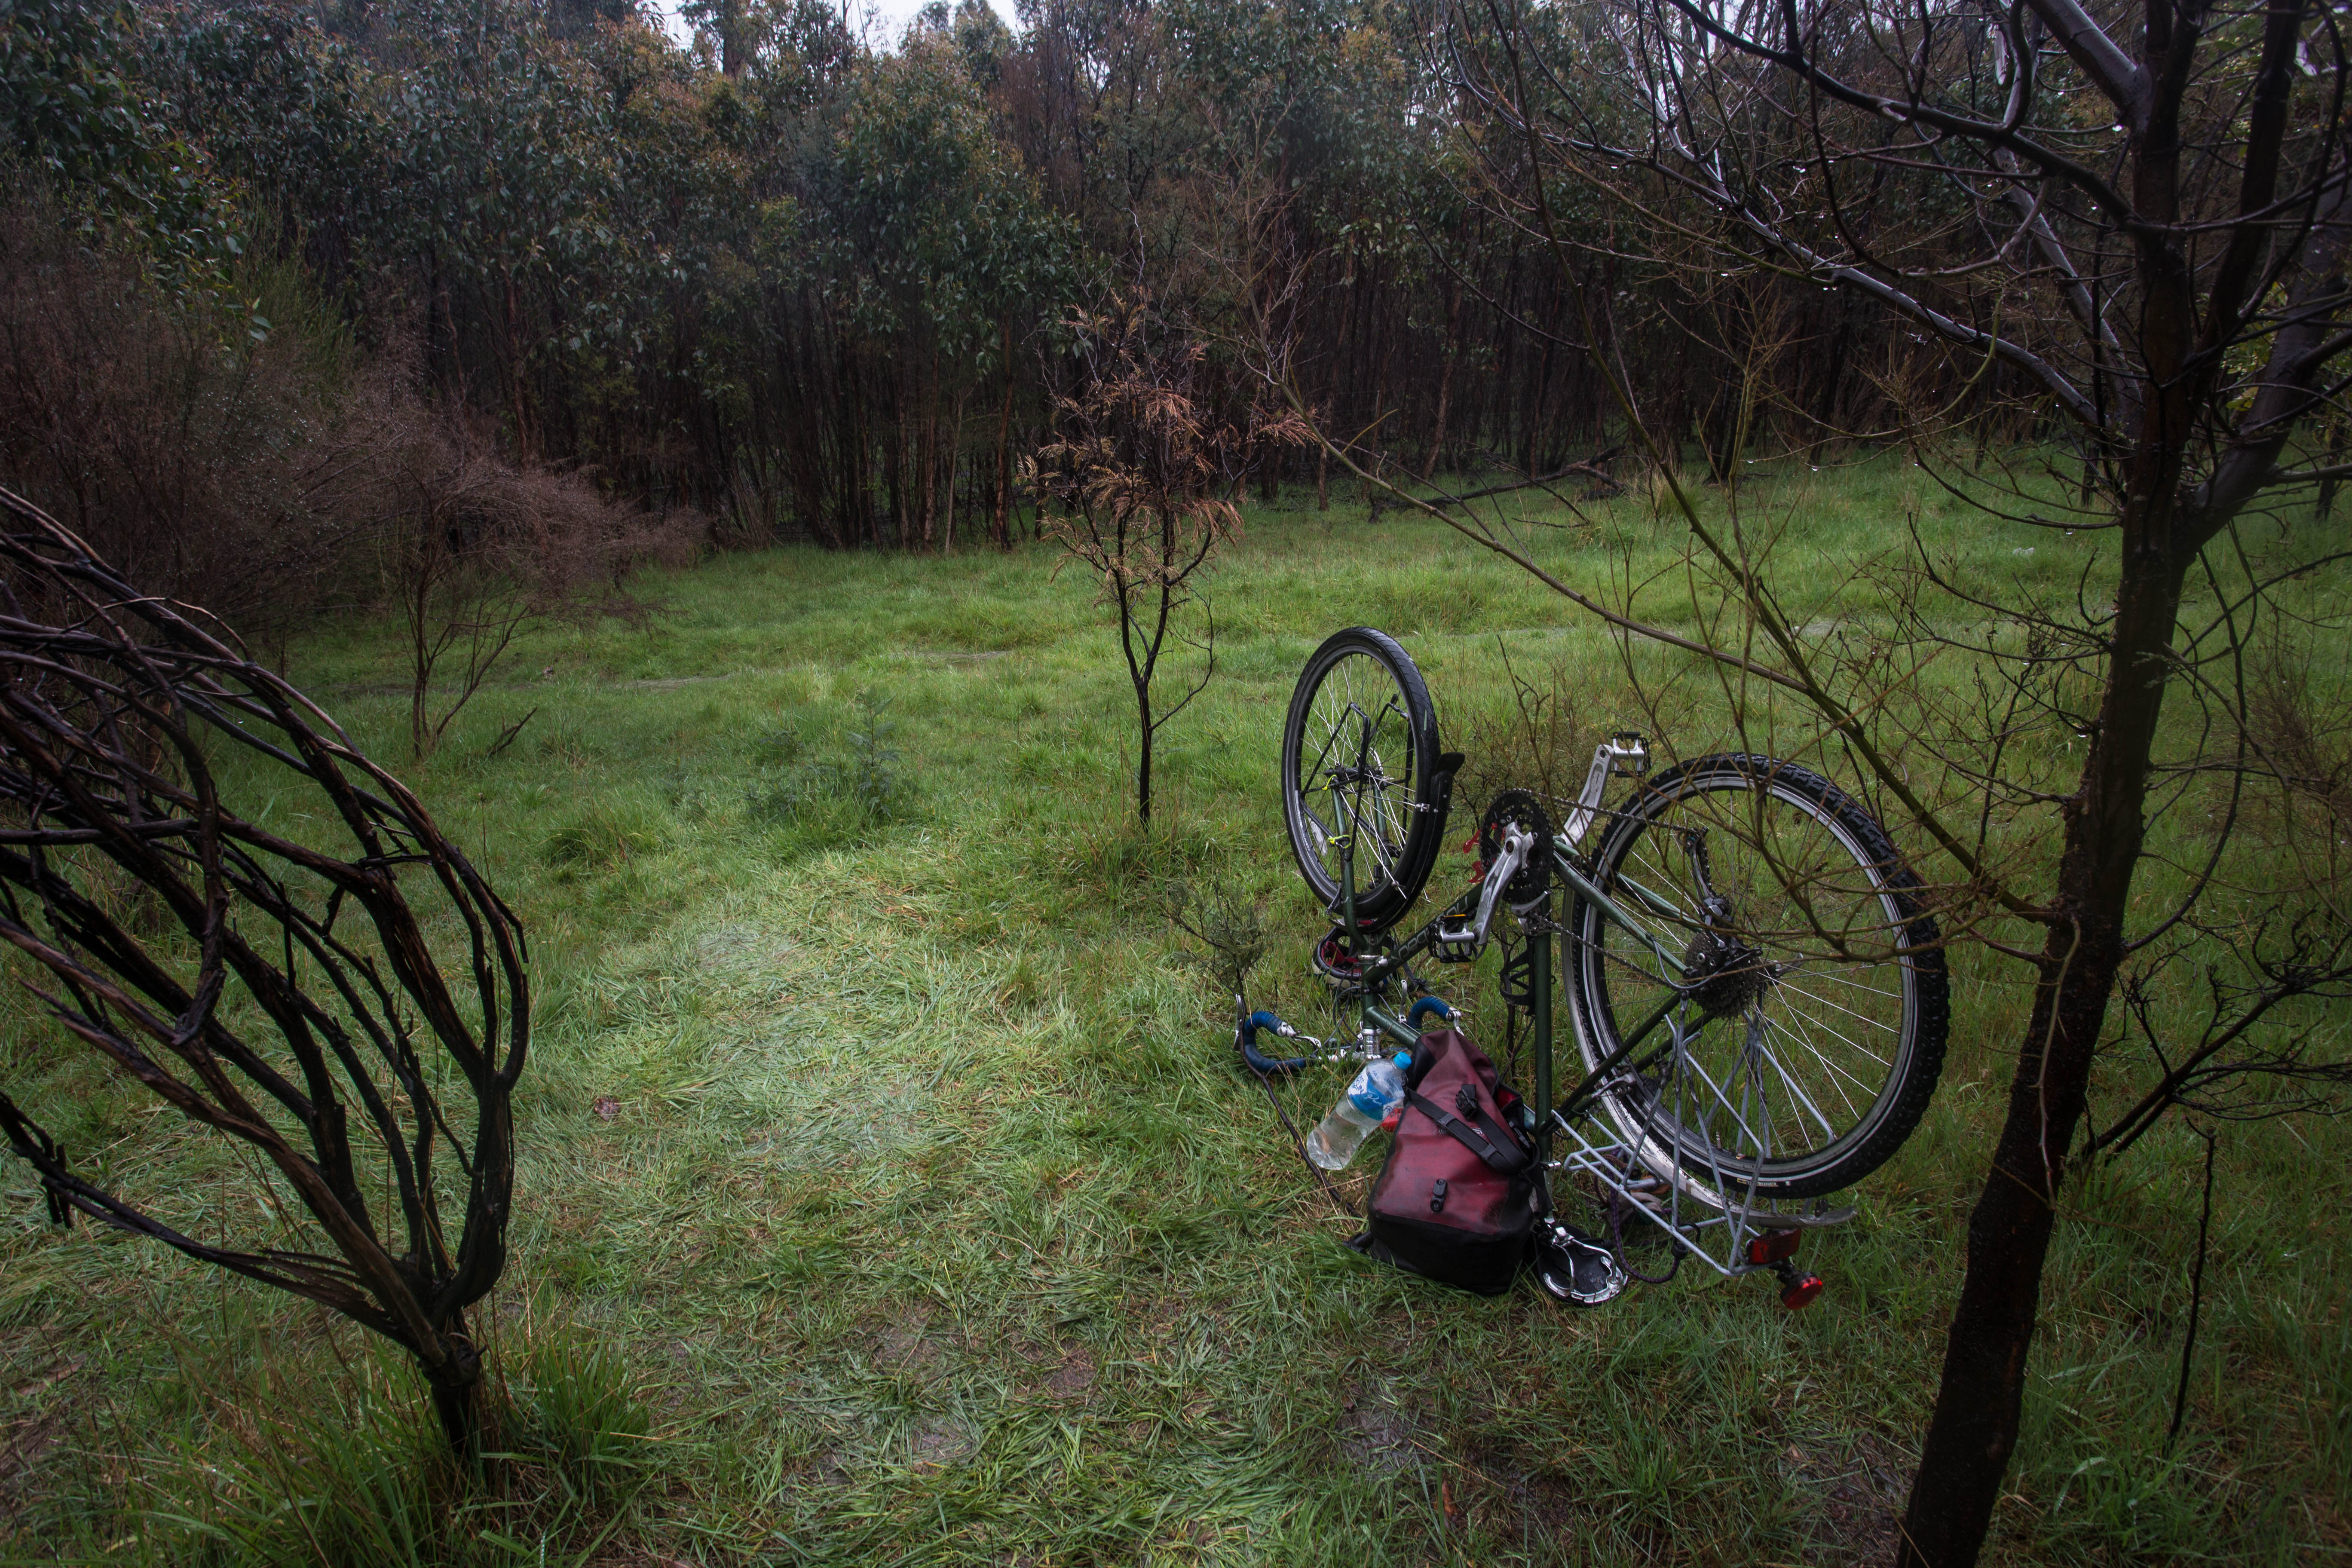 Fixing a puncture in the falling rain after packing up my saturated tent again. At that point, more than anything I wanted to be back in Melbourne with Elana.